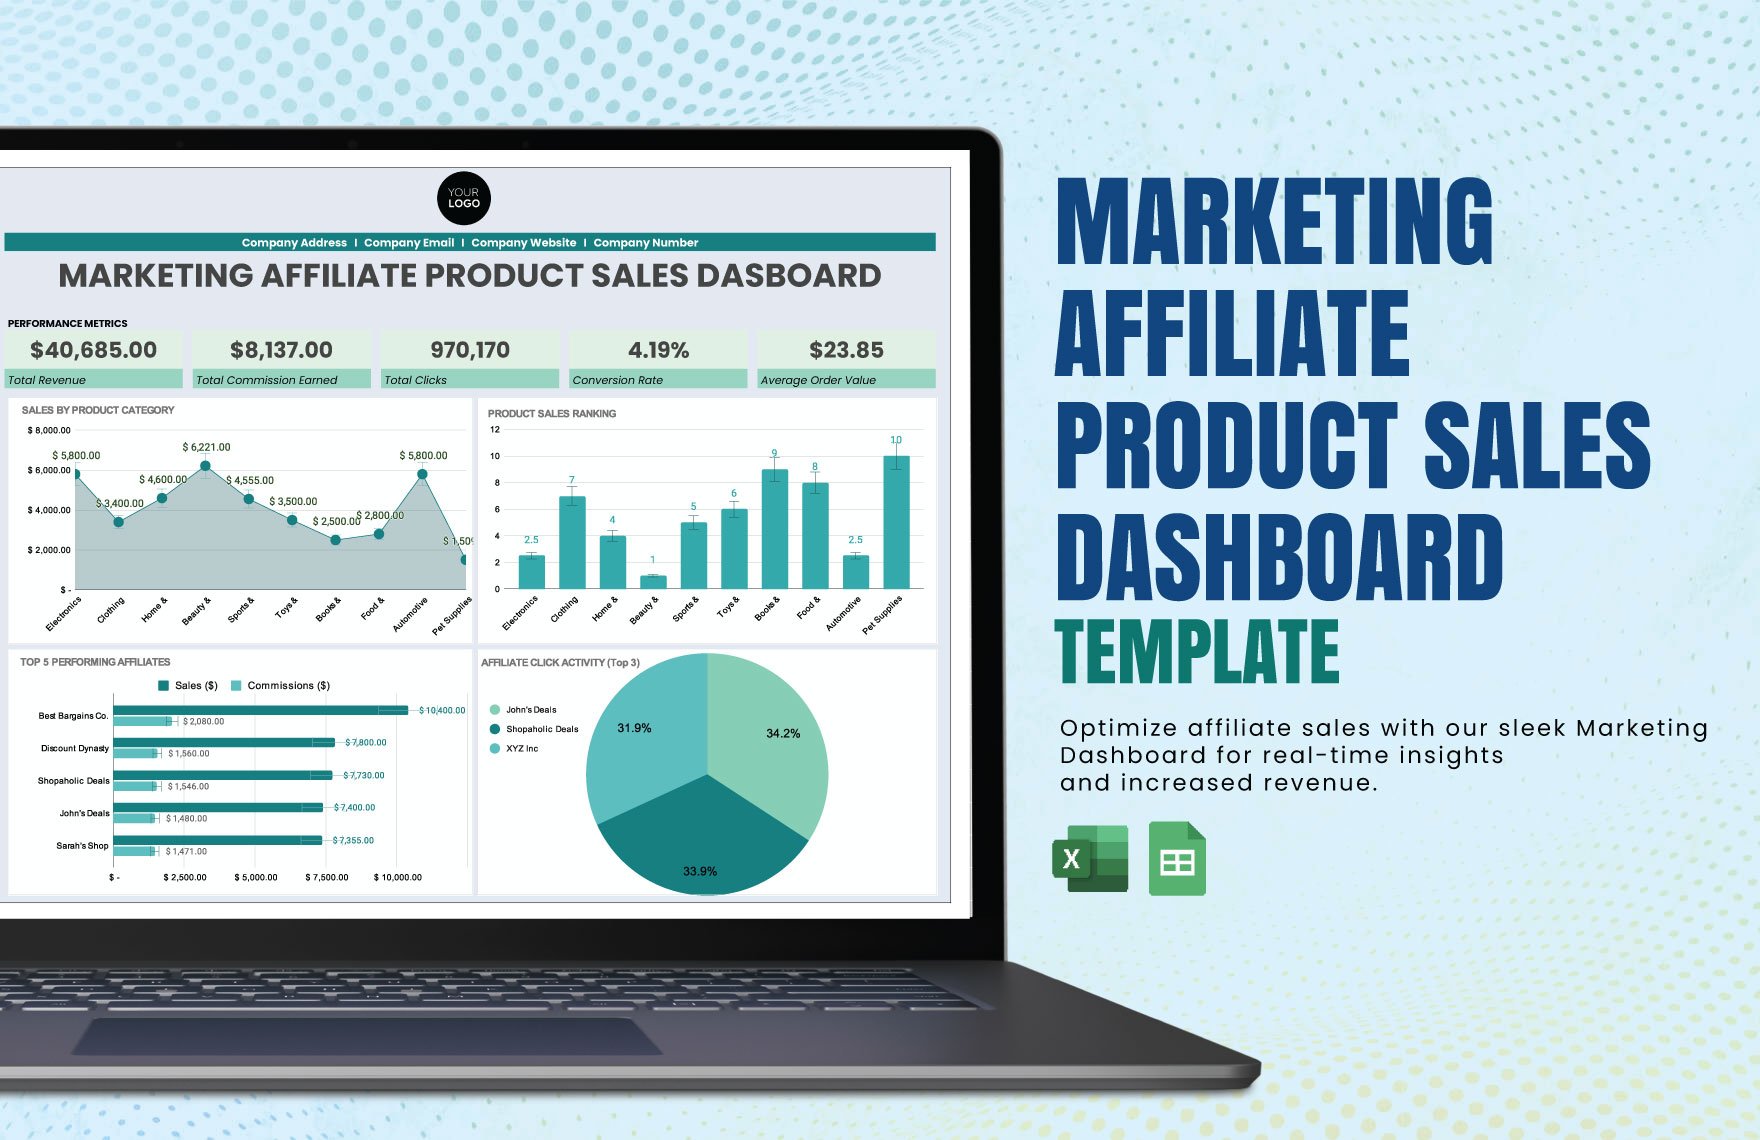 Marketing Affiliate Product Sales Dashboard Template